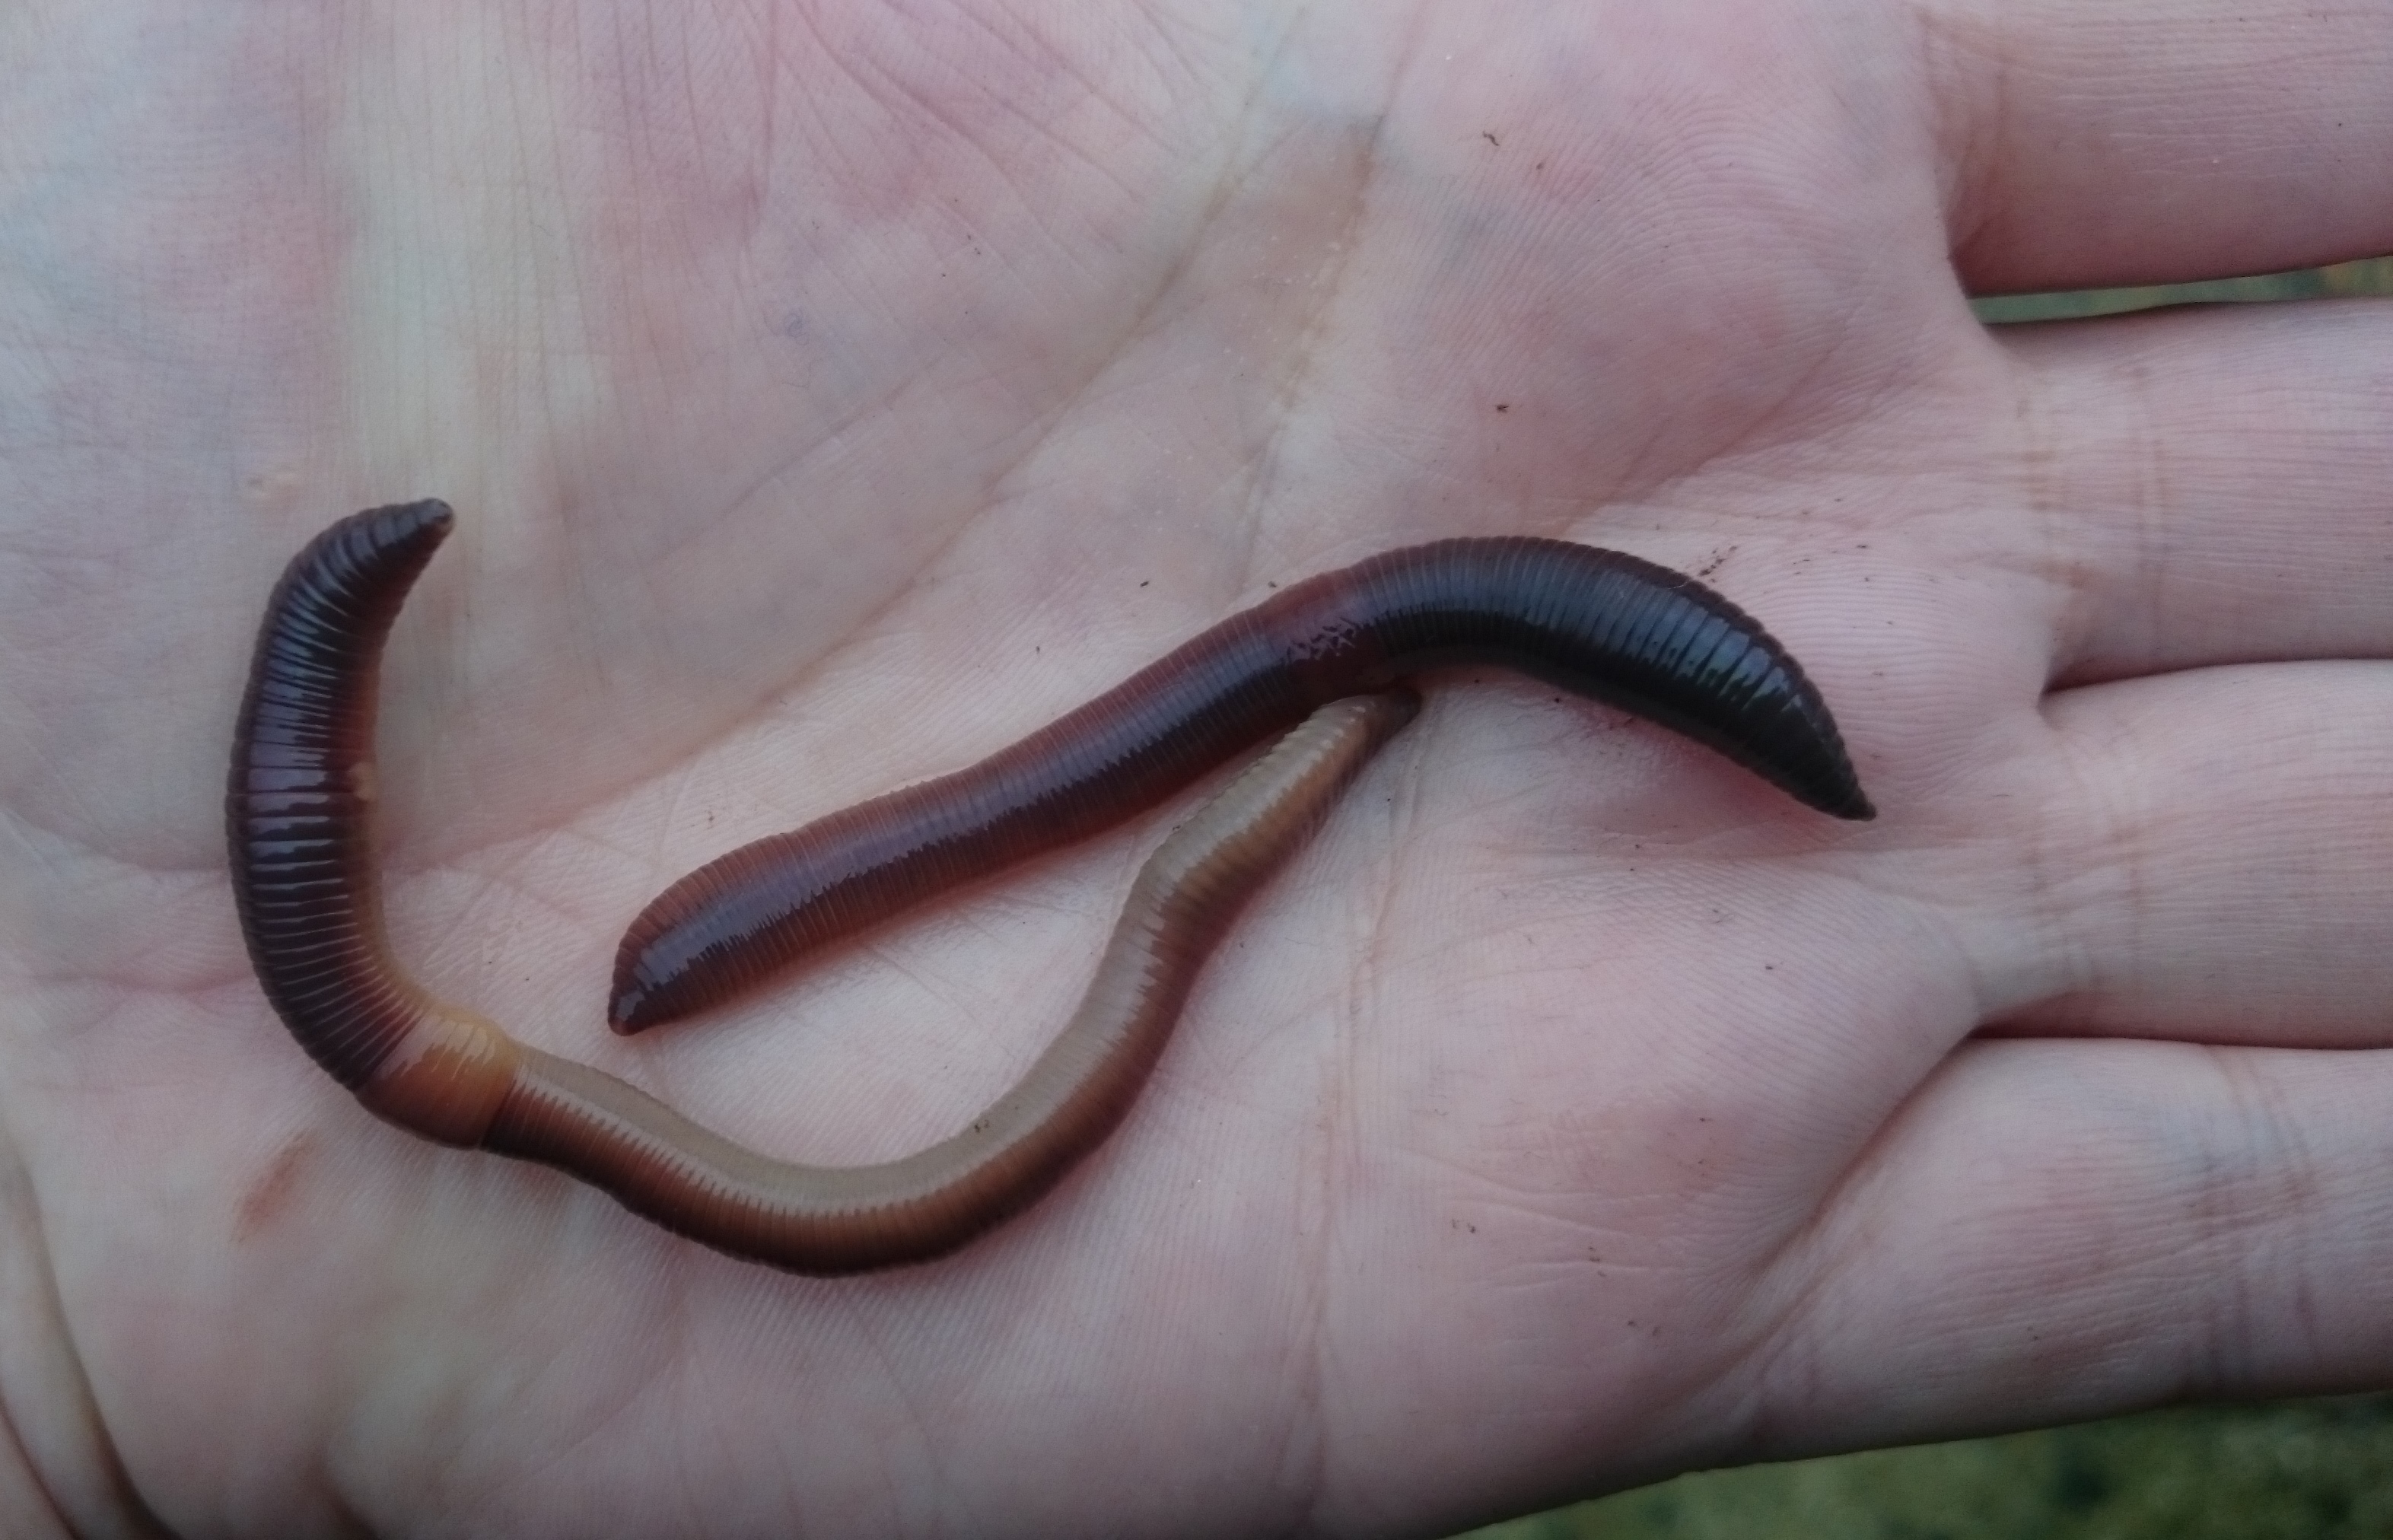 Two Lumbricus festivus earthworms on a hand